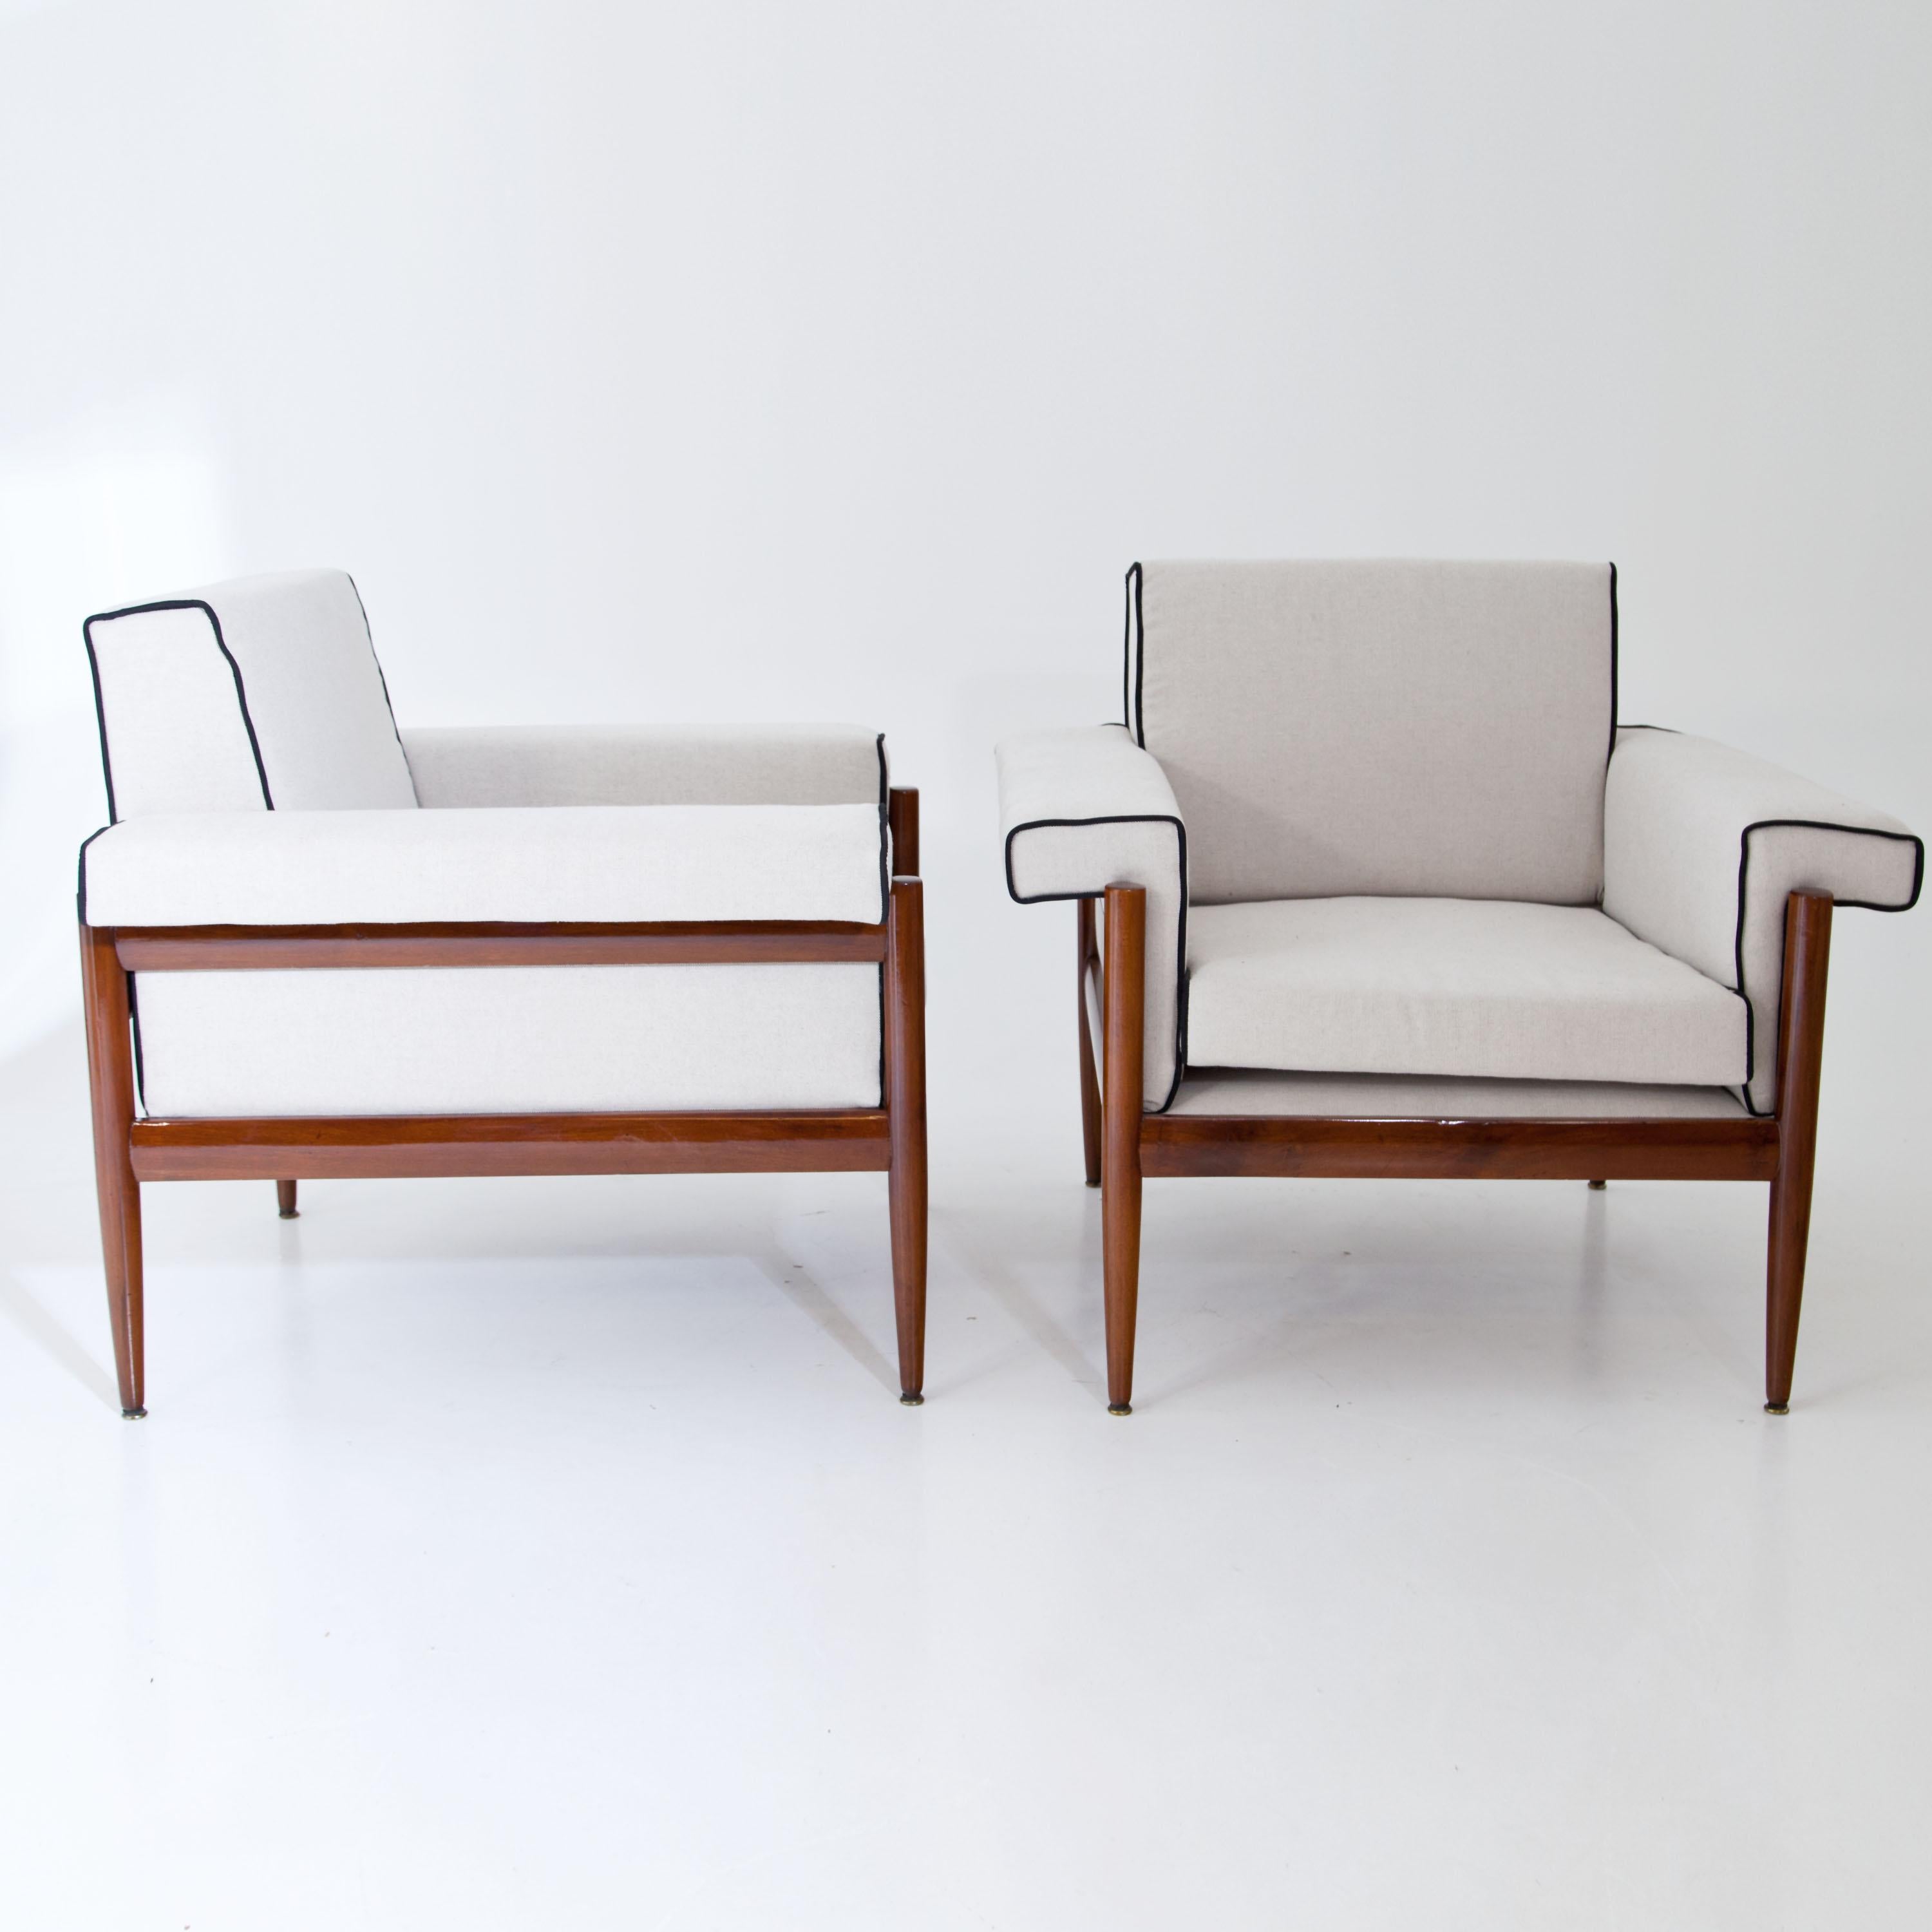 Pair of Italian Design Lounge Chairs, Trafilisa Isa Bergamo, Italy 1950s In Good Condition For Sale In Greding, DE